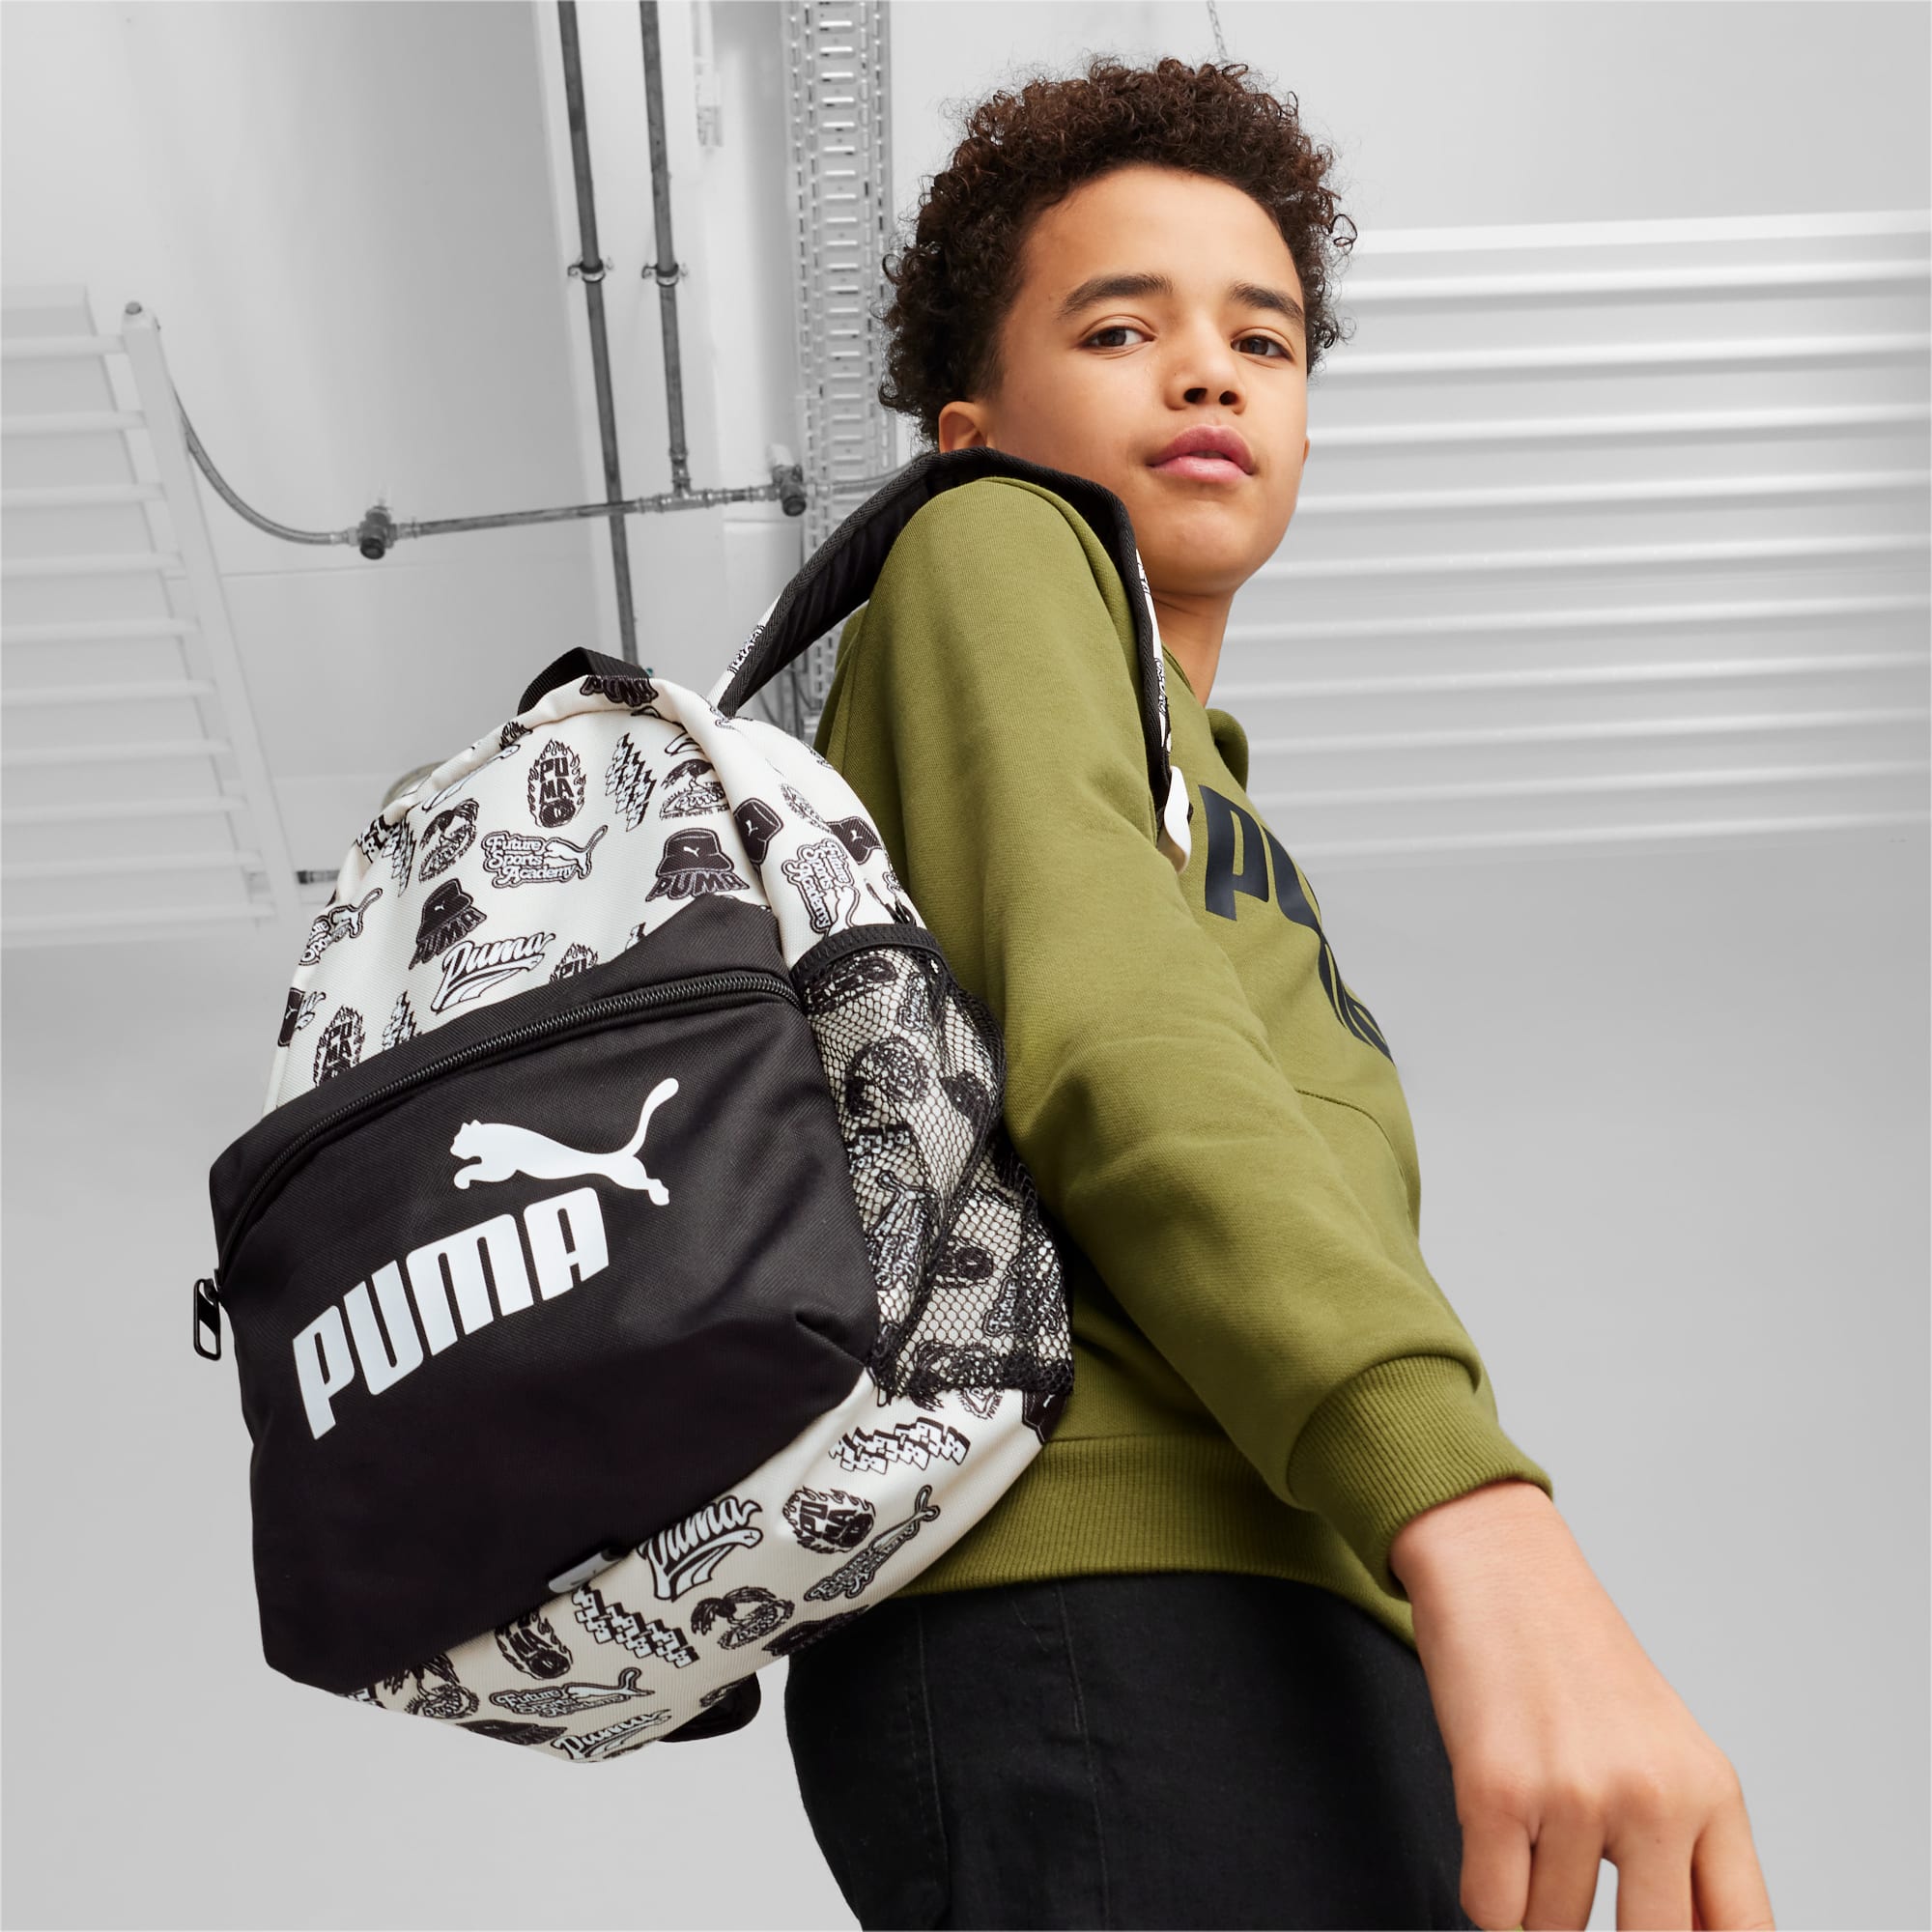 PUMA Phase Small Backpack, Alpine Snow/90Ies AOP, Accessories